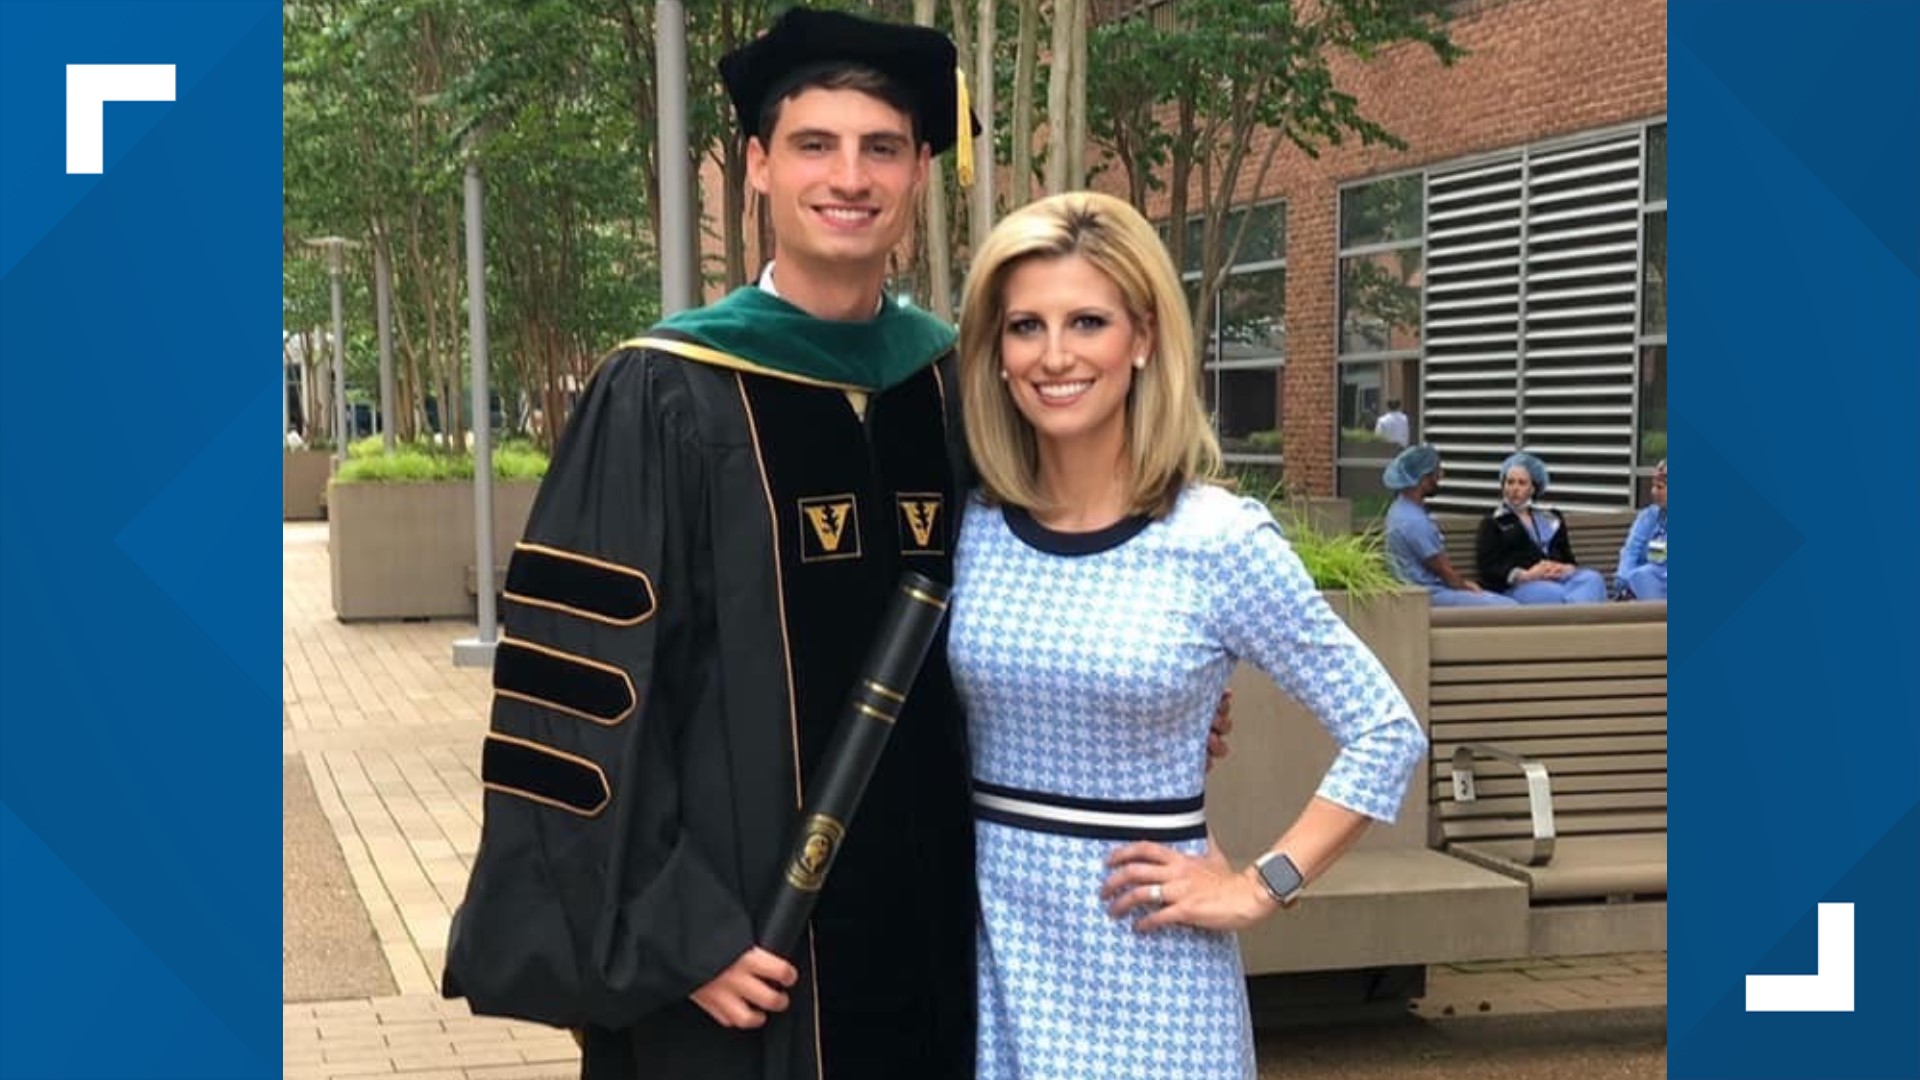 William French, M.D., is a North Carolina doctor in his first year of residency. He's also the brother of WCNC anchor Sarah French.